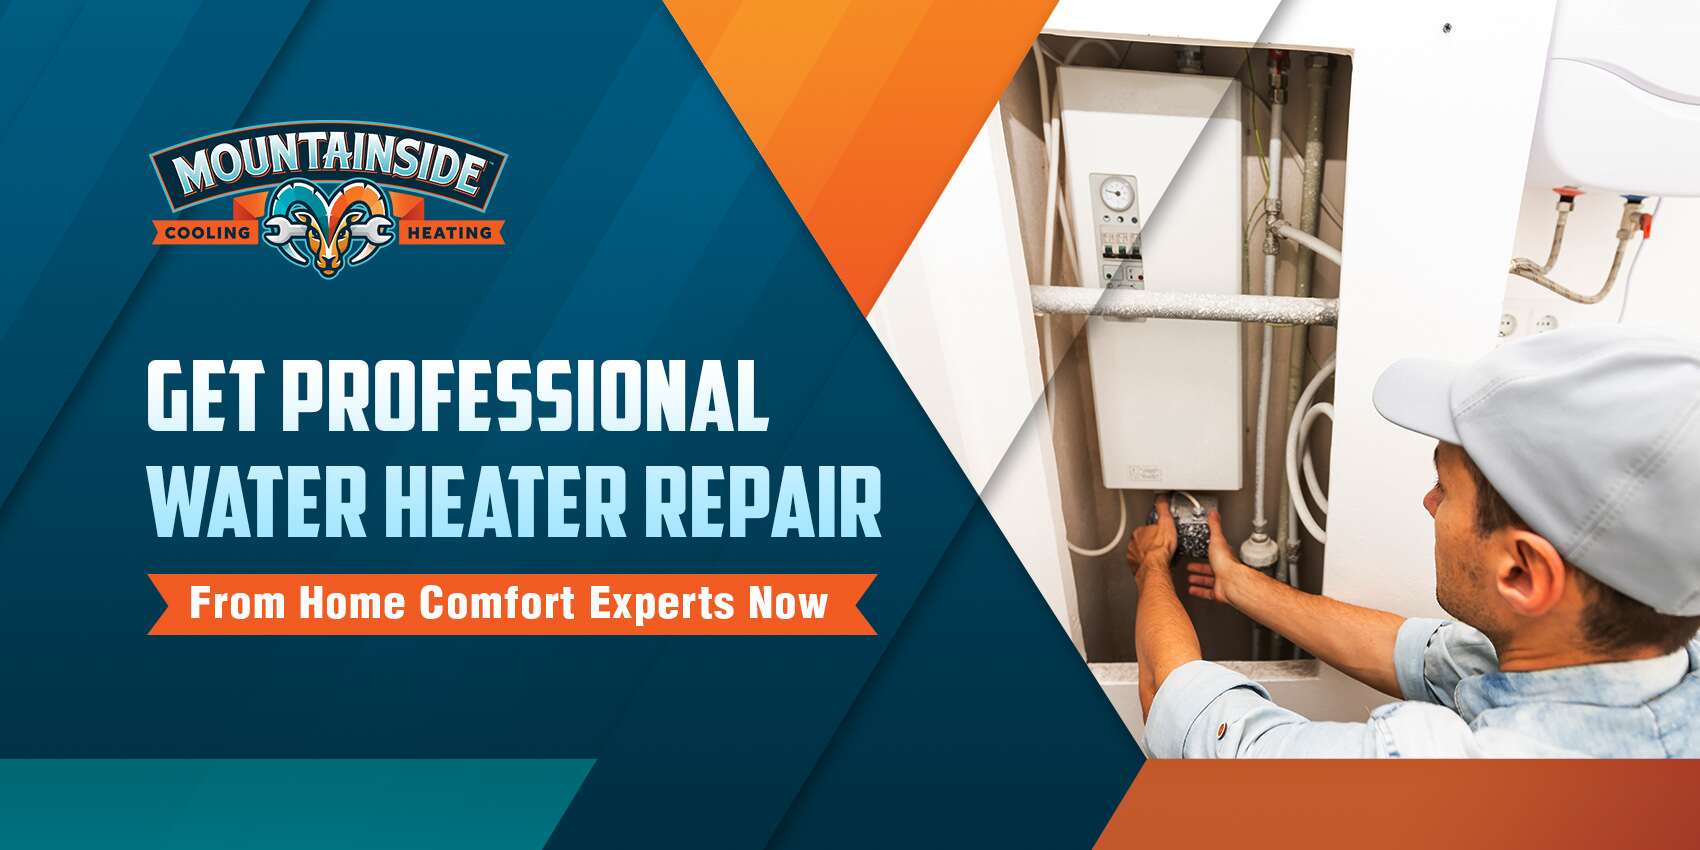 FAST AND QUALITY HEATER REPAIR SERVICES